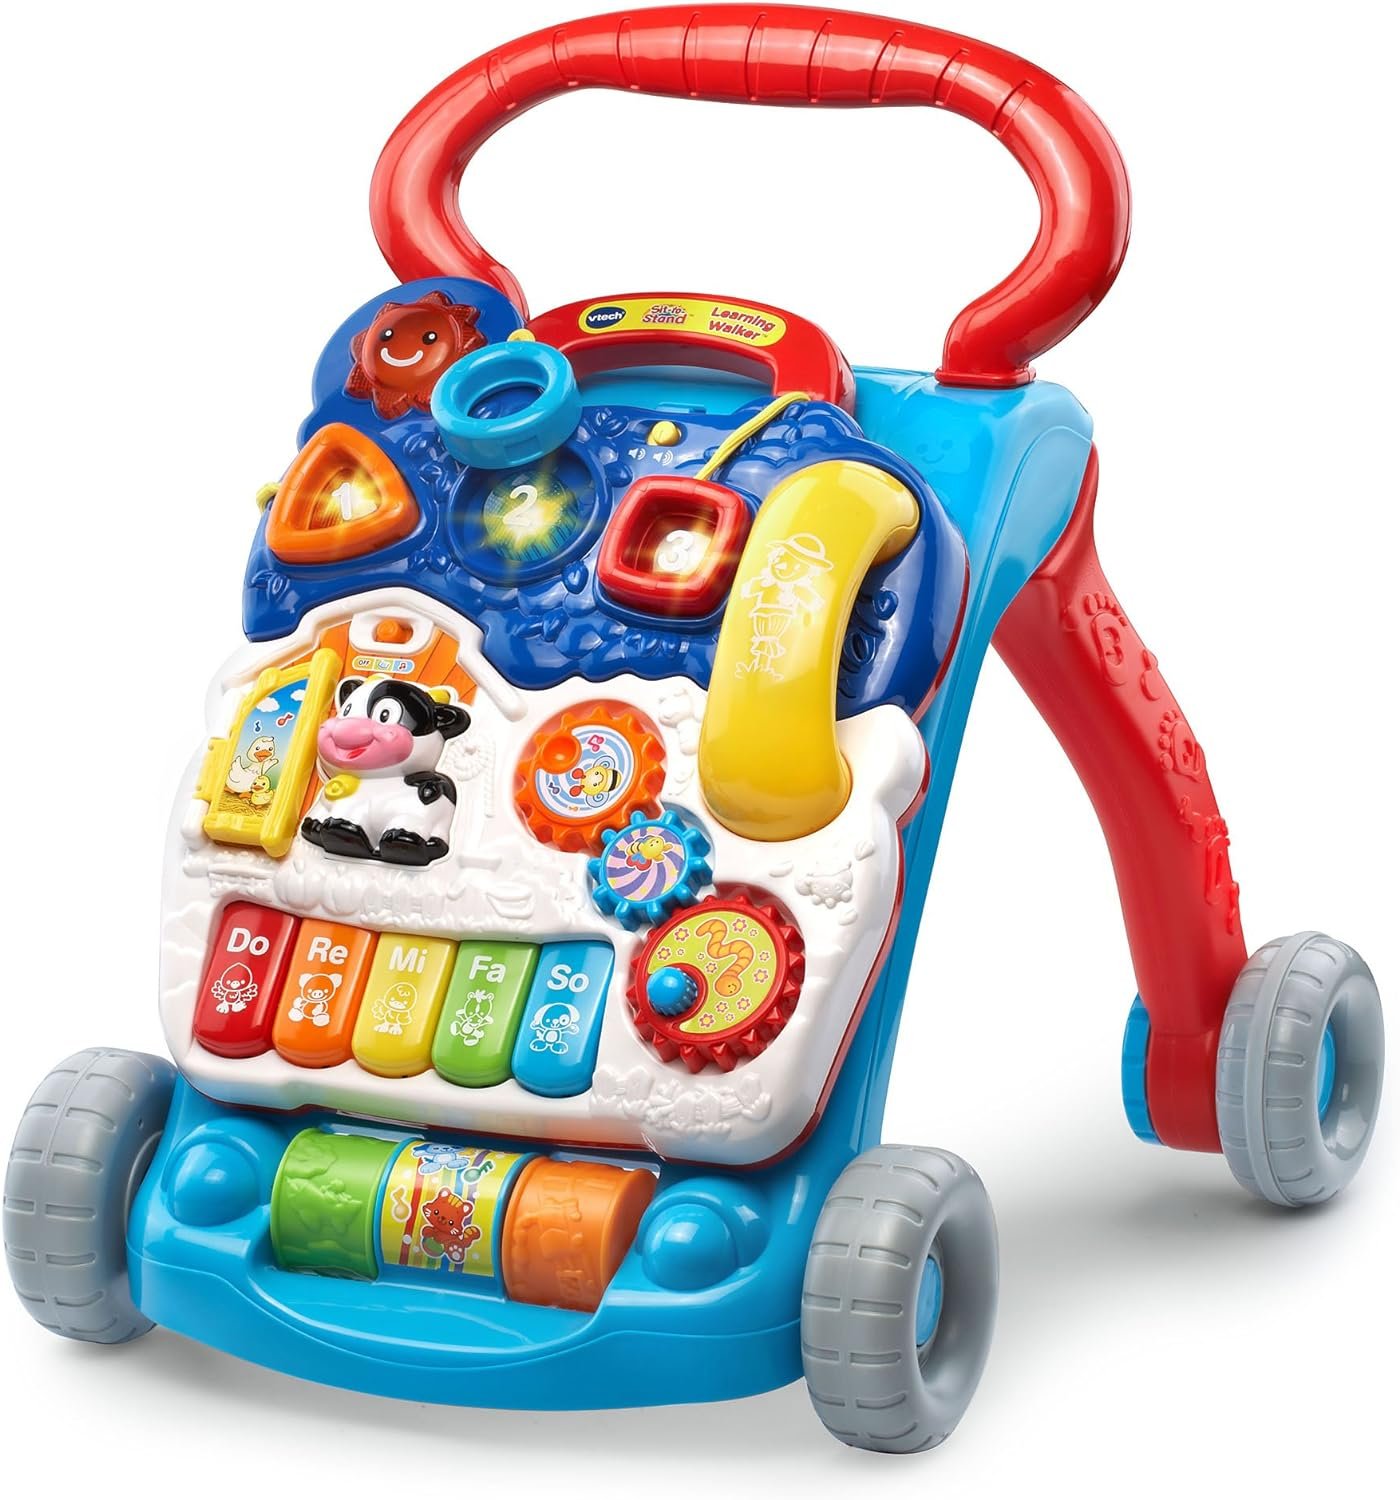 VTech Sit-To-Stand Learning Walker (Frustration Free Packaging), Blue Review